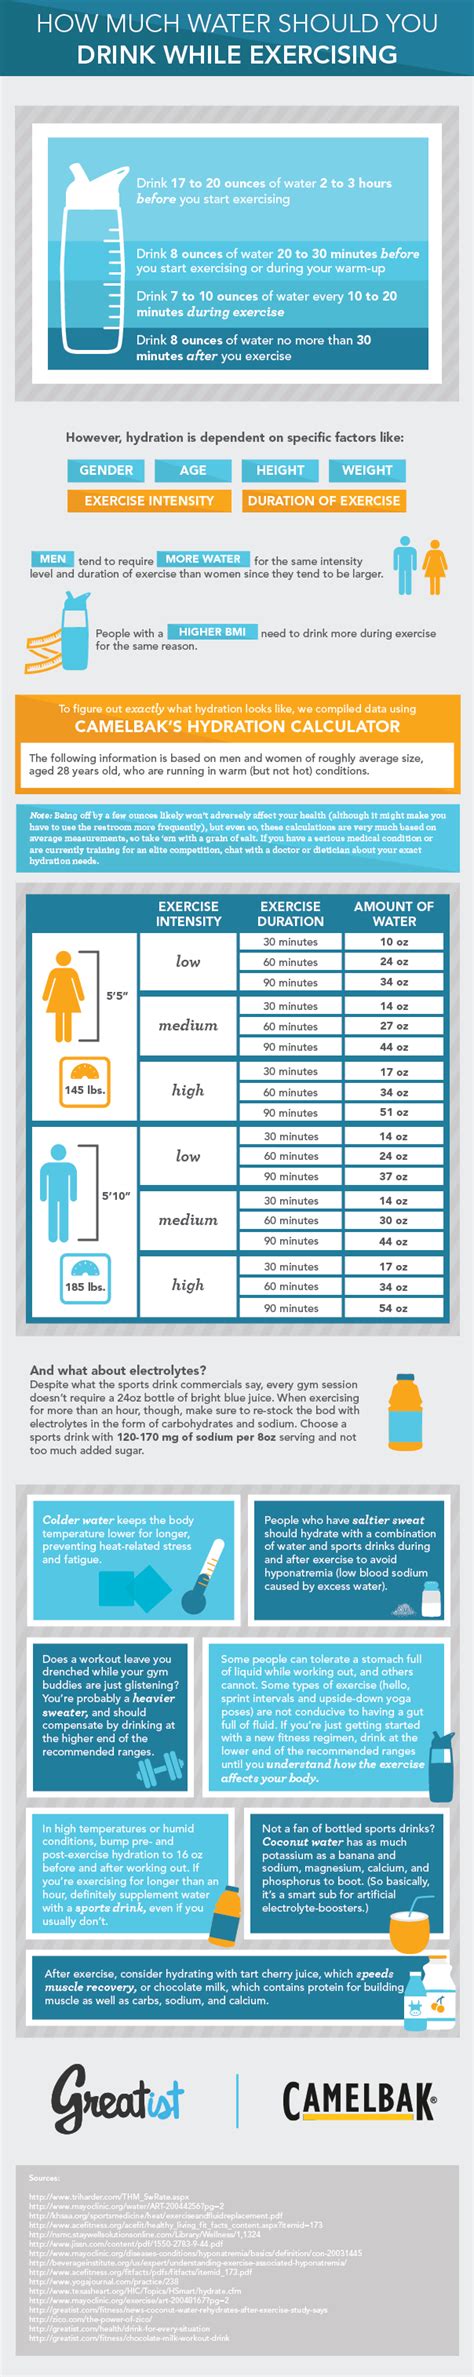 How Much Water Should You Drink While Exercising Pictures